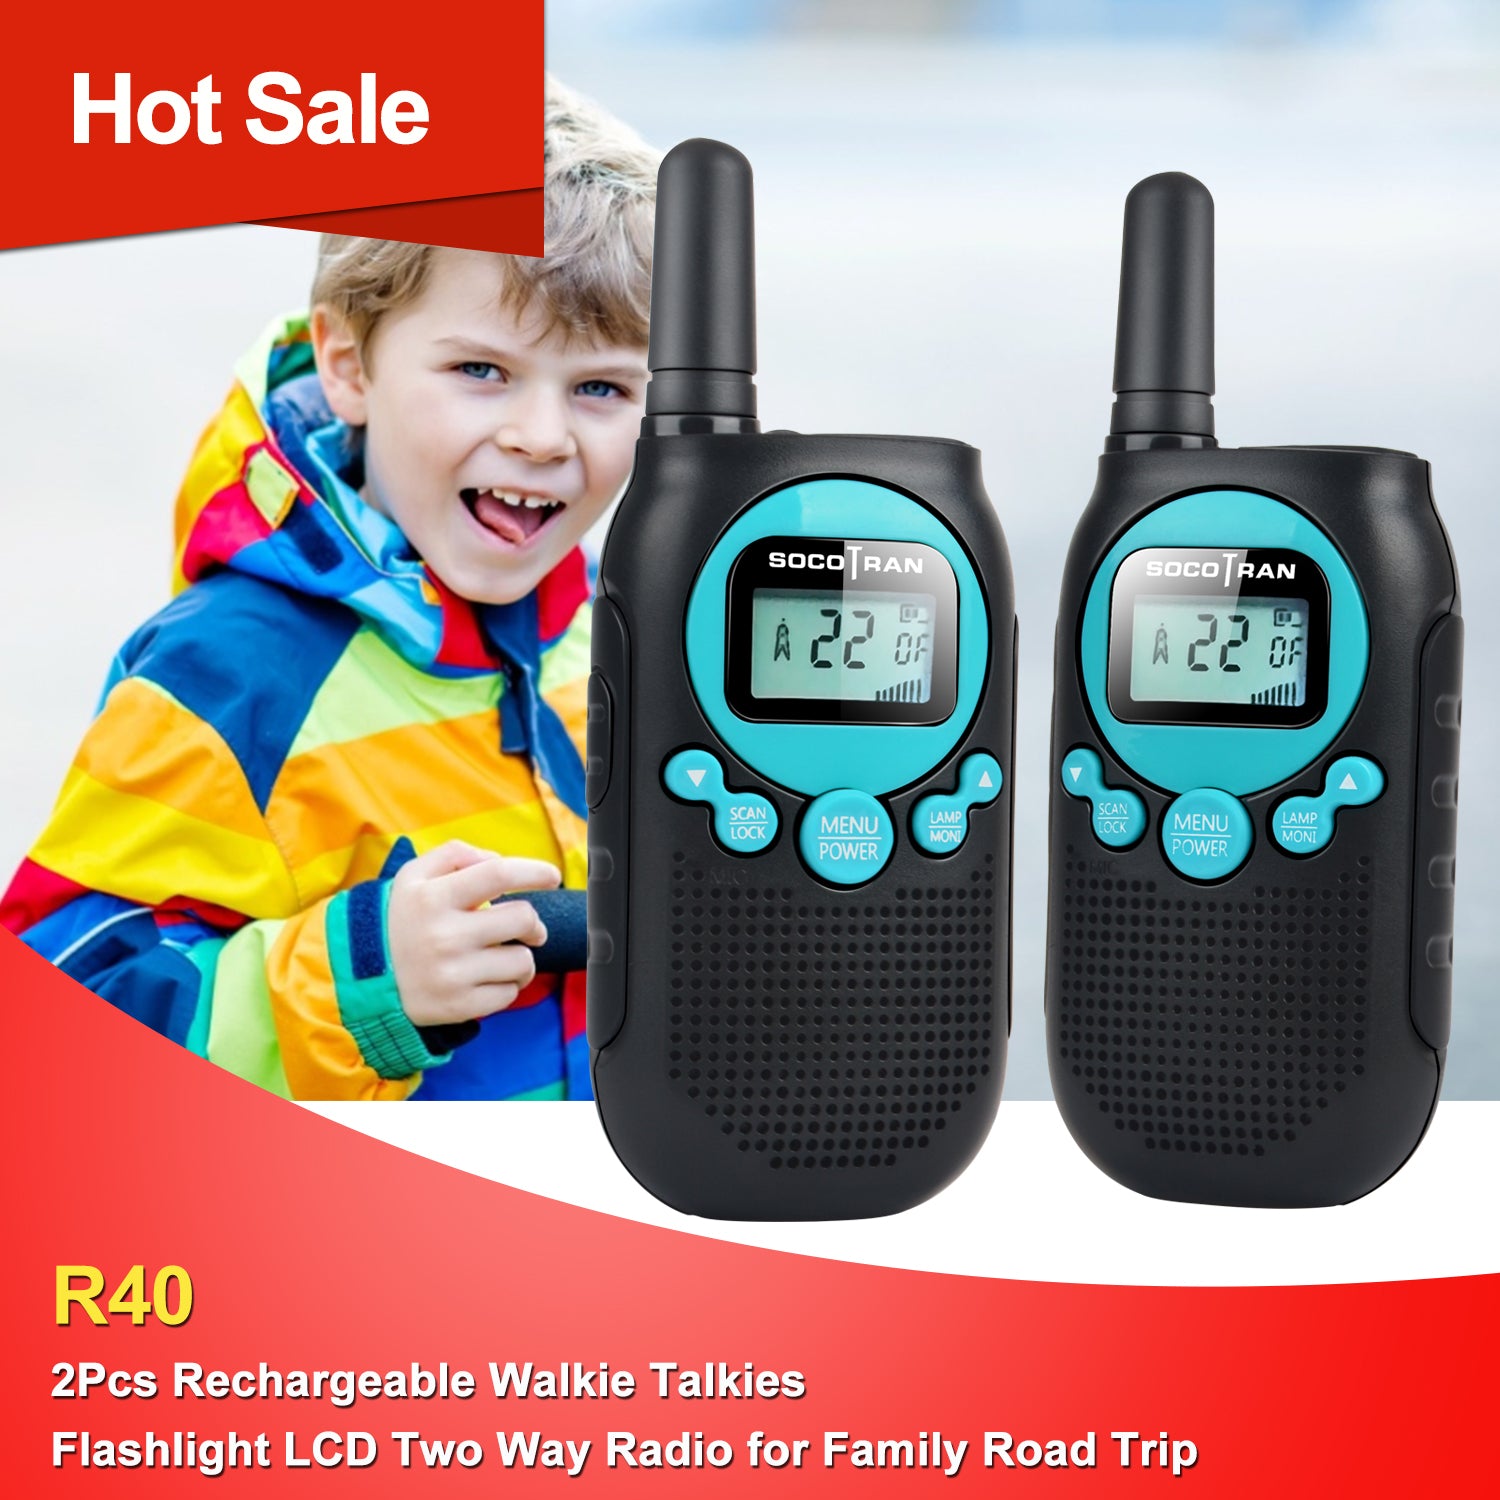 FRS/GMRS Walkie Talkie License Free 22CH 0.5W for Kids R40